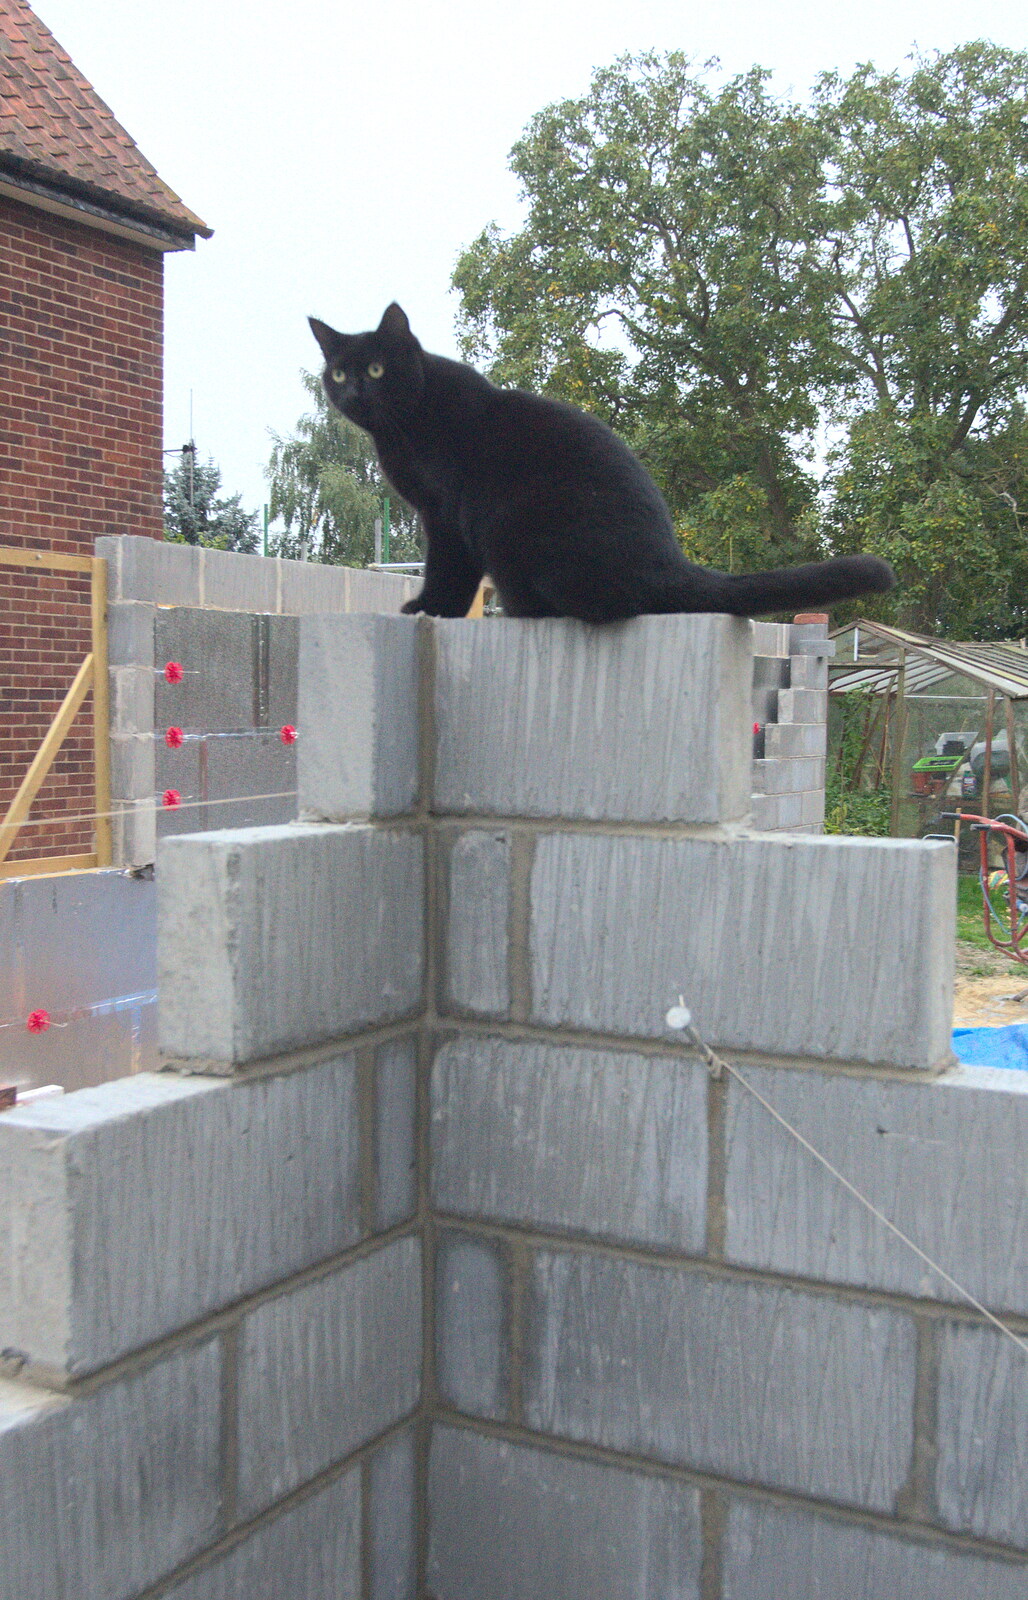 Millie perches on breeze blocks from A Building Site Update, Brome, Suffolk - 13th October 2013